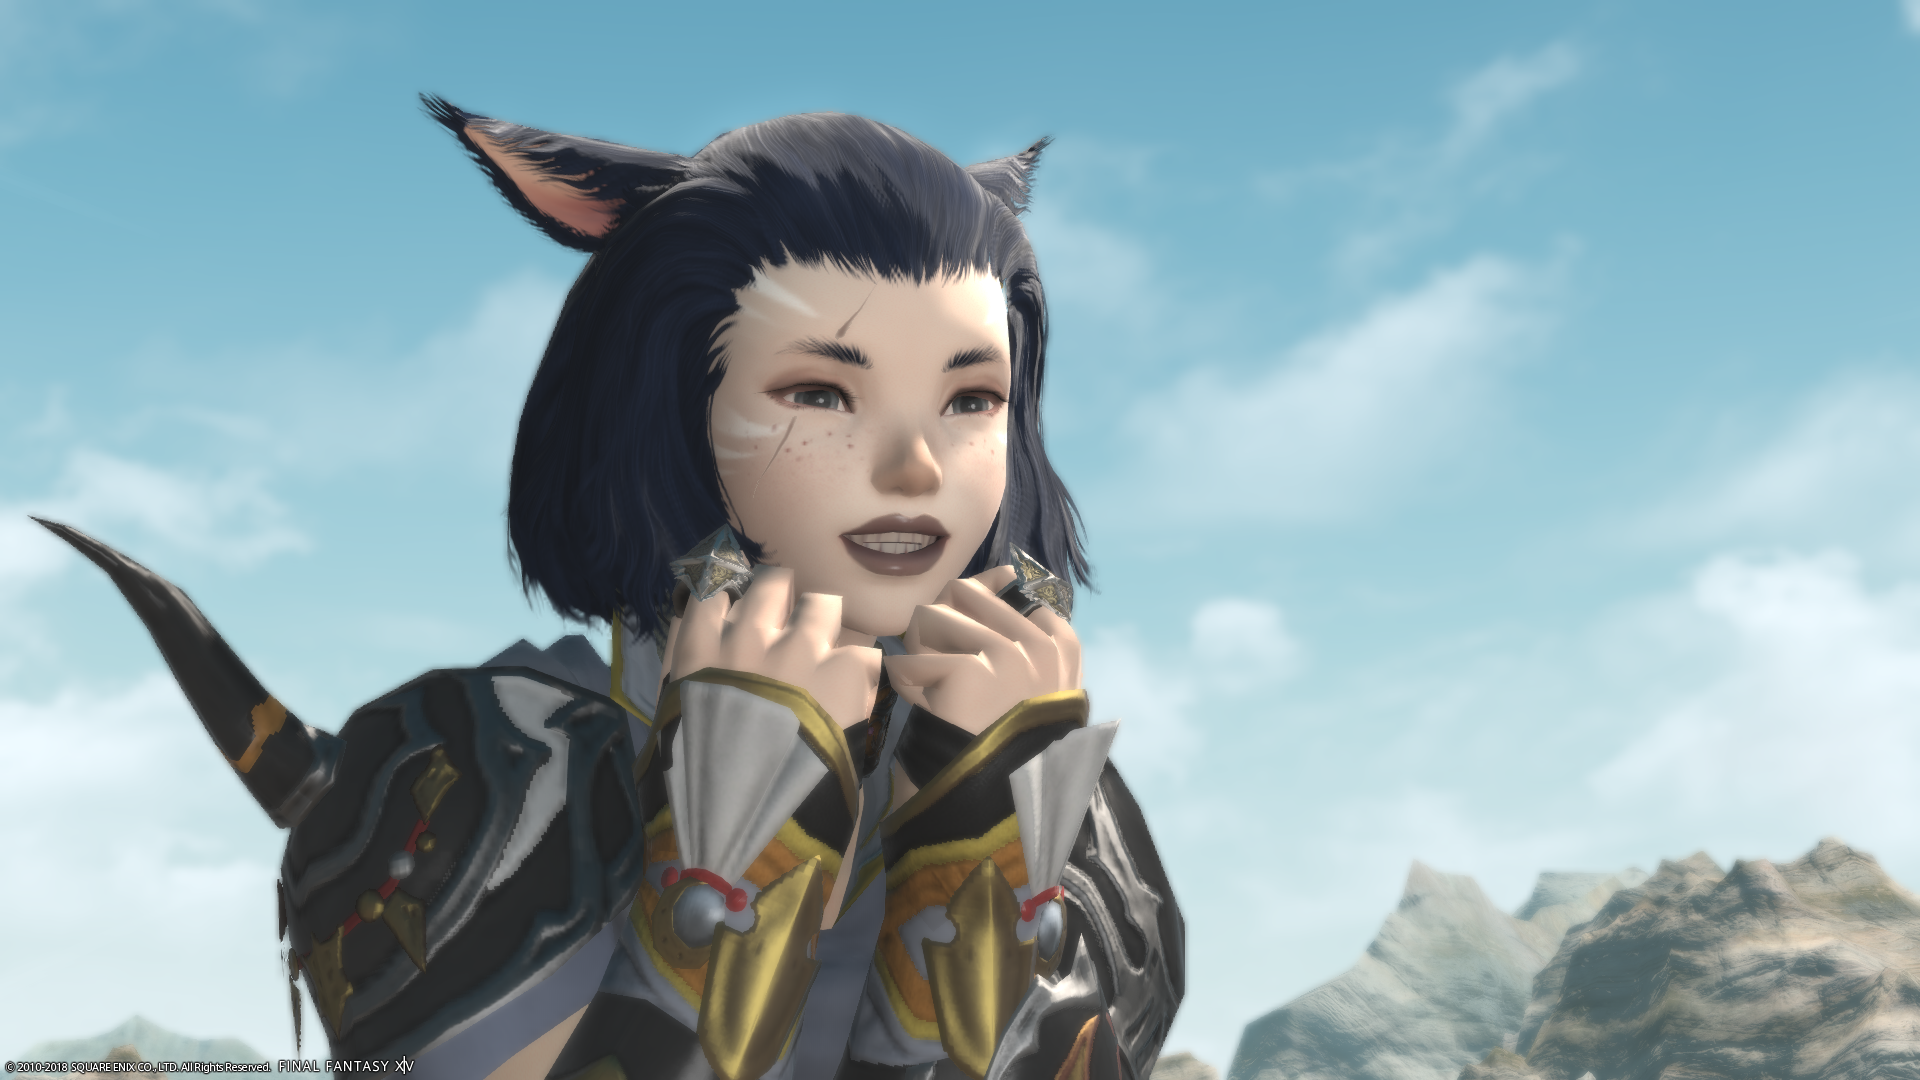 My Final Fantasy 14 Character, From 2010-2018